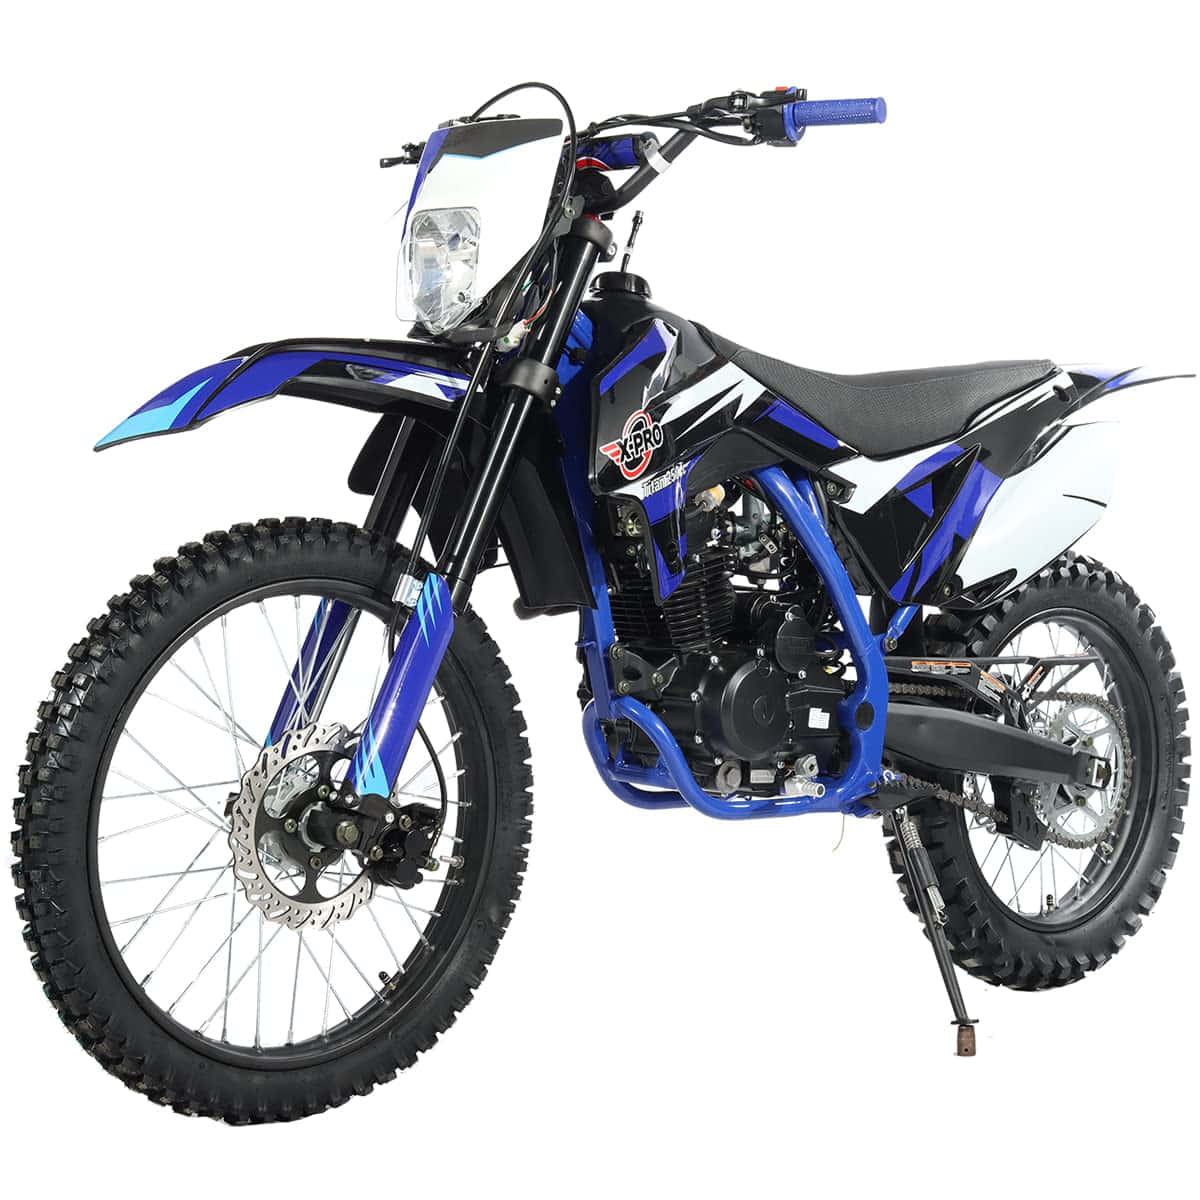 A Blue Dirt Bike Is Shown Against A White Background